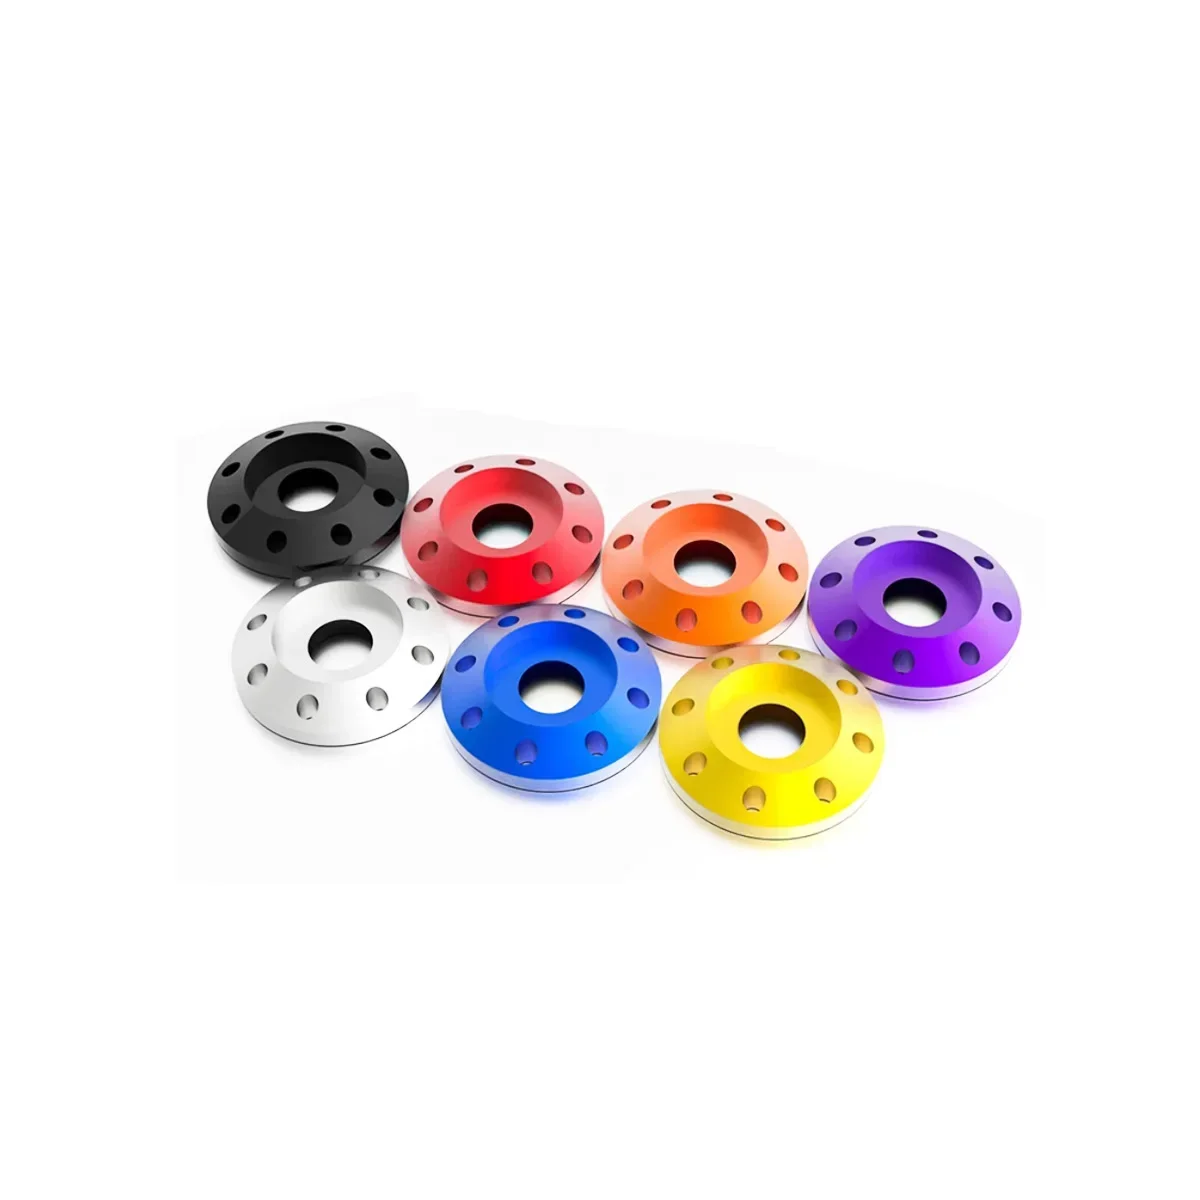 

Aluminum Alloy Eight Hole Disc Washer / Electric Motorcycle Pedal Modification Gasket Colorful Decorative Gasket M6M8